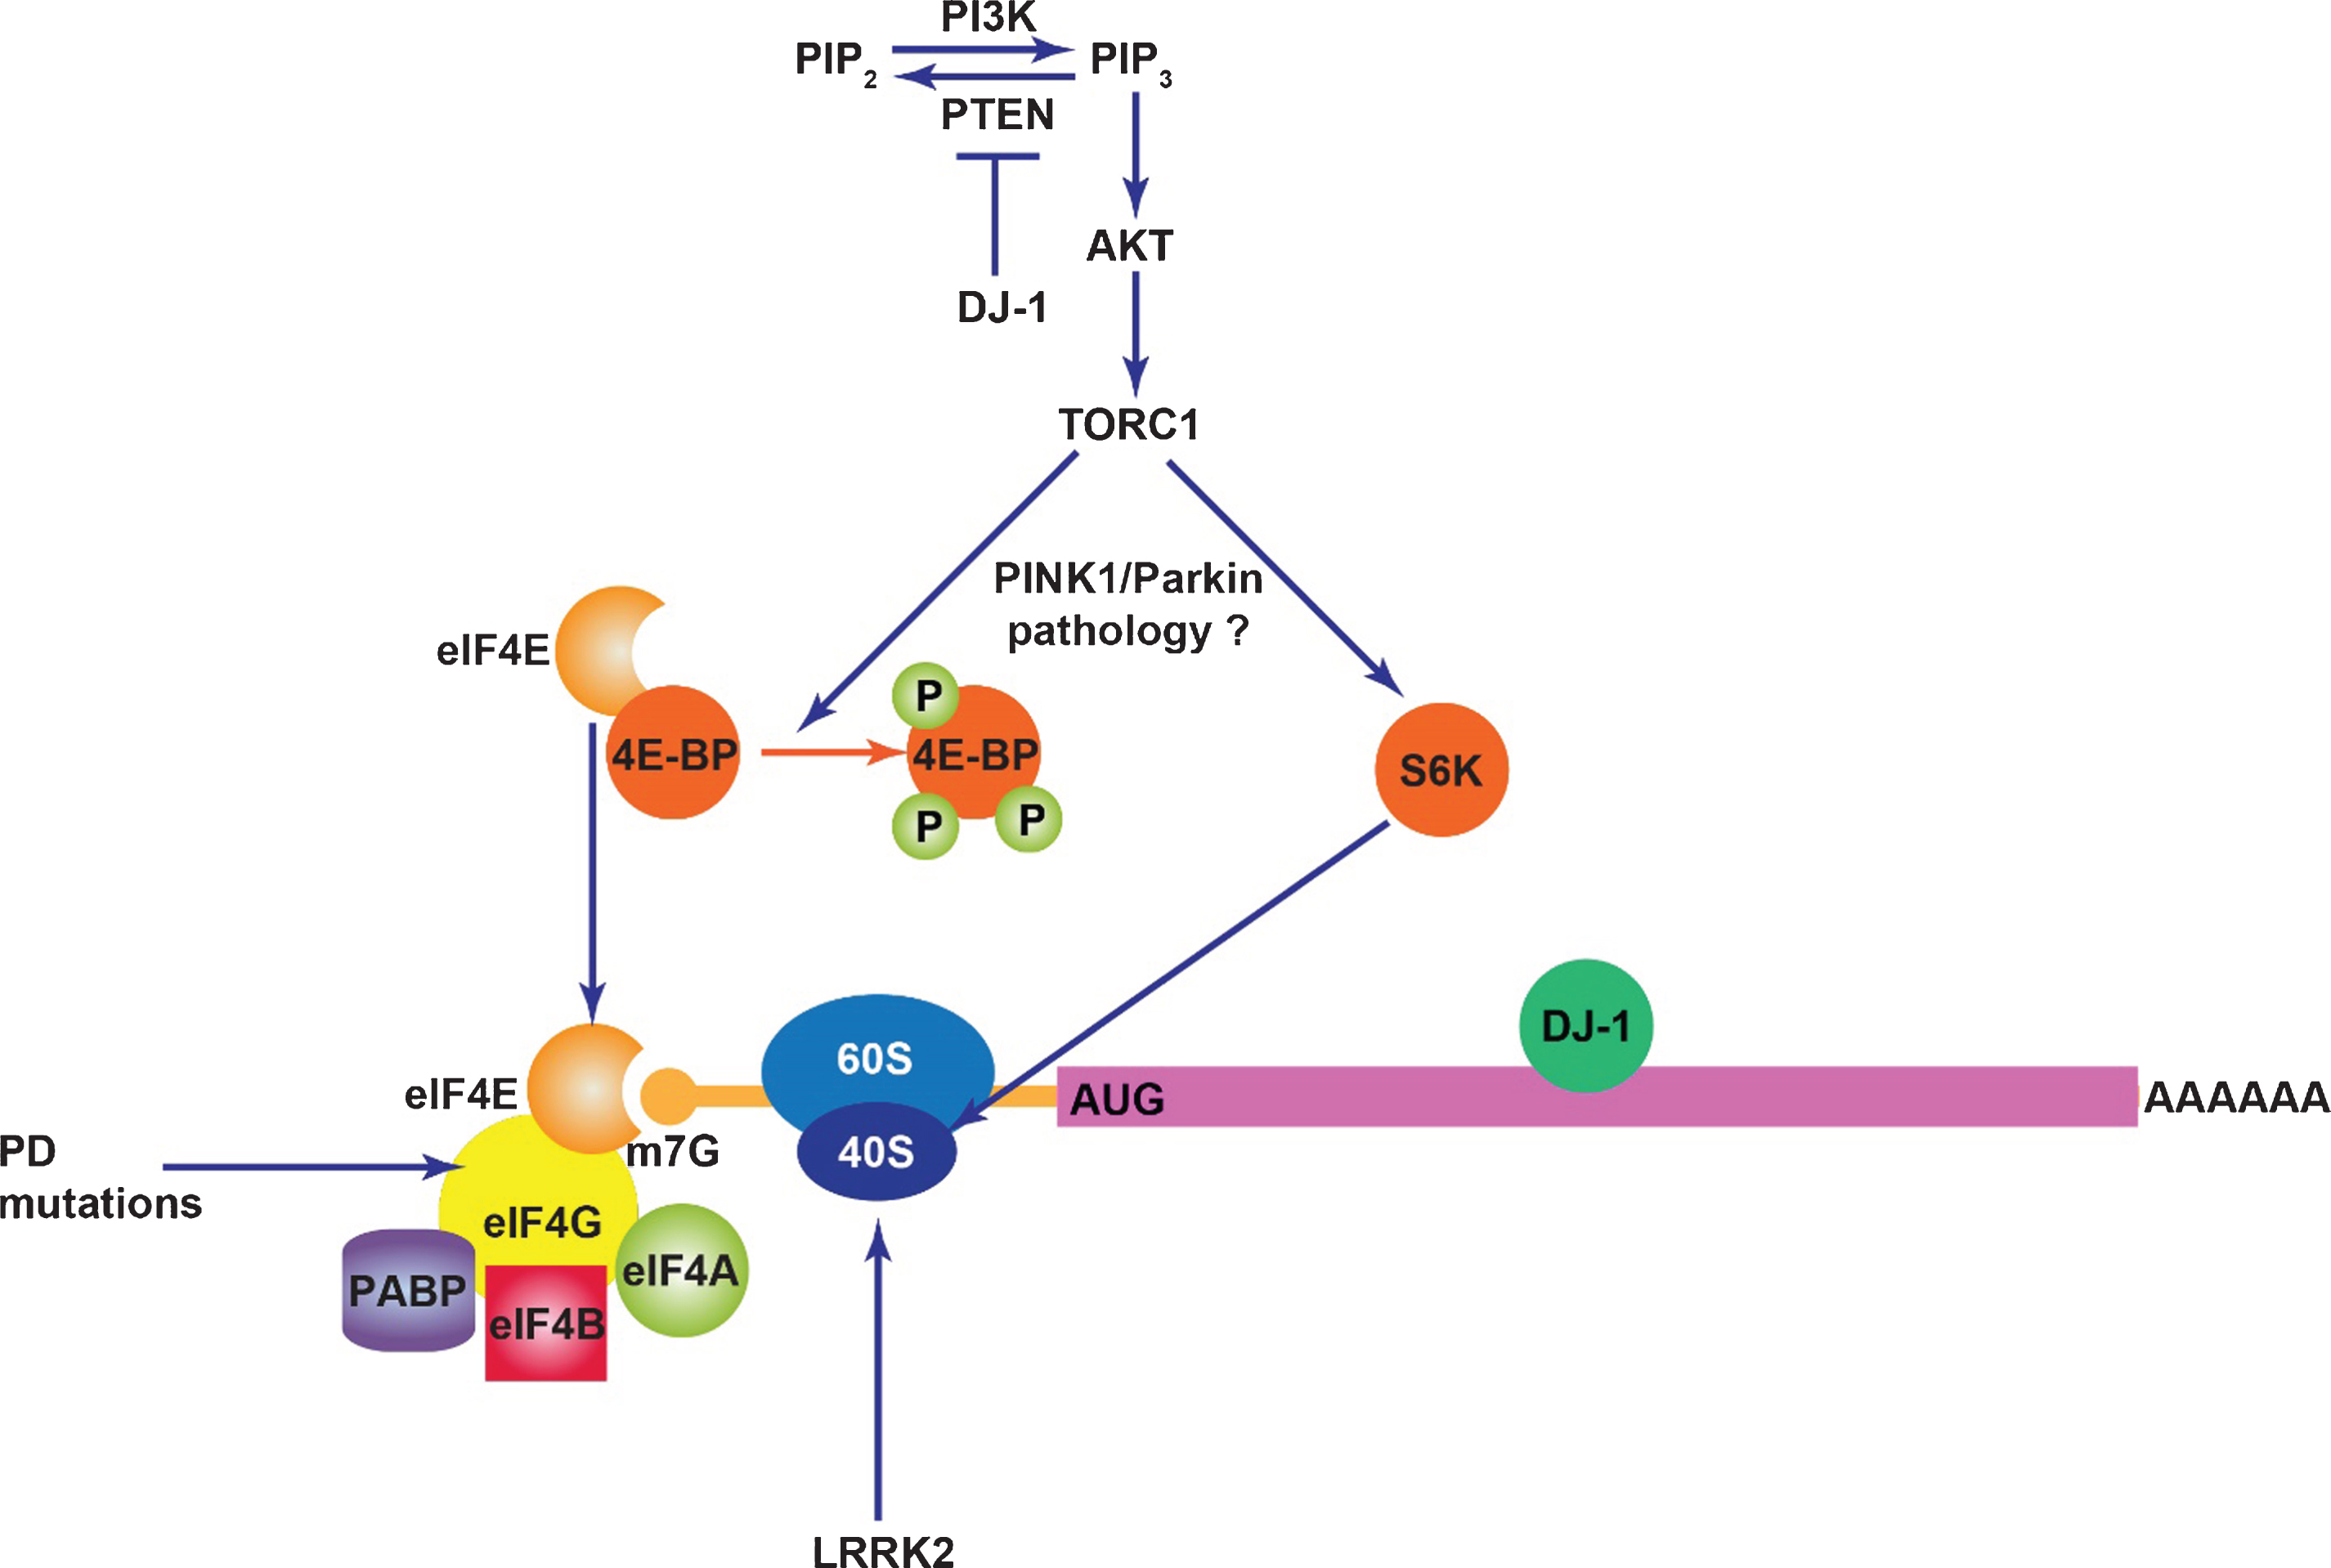 The impact of PD proteins on mRNA translation. DJ-1 inhibits PTEN, a negative regulator of PI3K/Akt signaling and also binds to certain mRNA transcripts in a manner that inhibits their translation. TORC1 activity may contribute to PINK1/Parkin pathology potentially through mRNA translation. Mutations in the translation initiation factor eIF4G1 likely cause PD. LRRK2 stimulates mRNA translation through interaction with the ribosome and phosphorylation of s15.